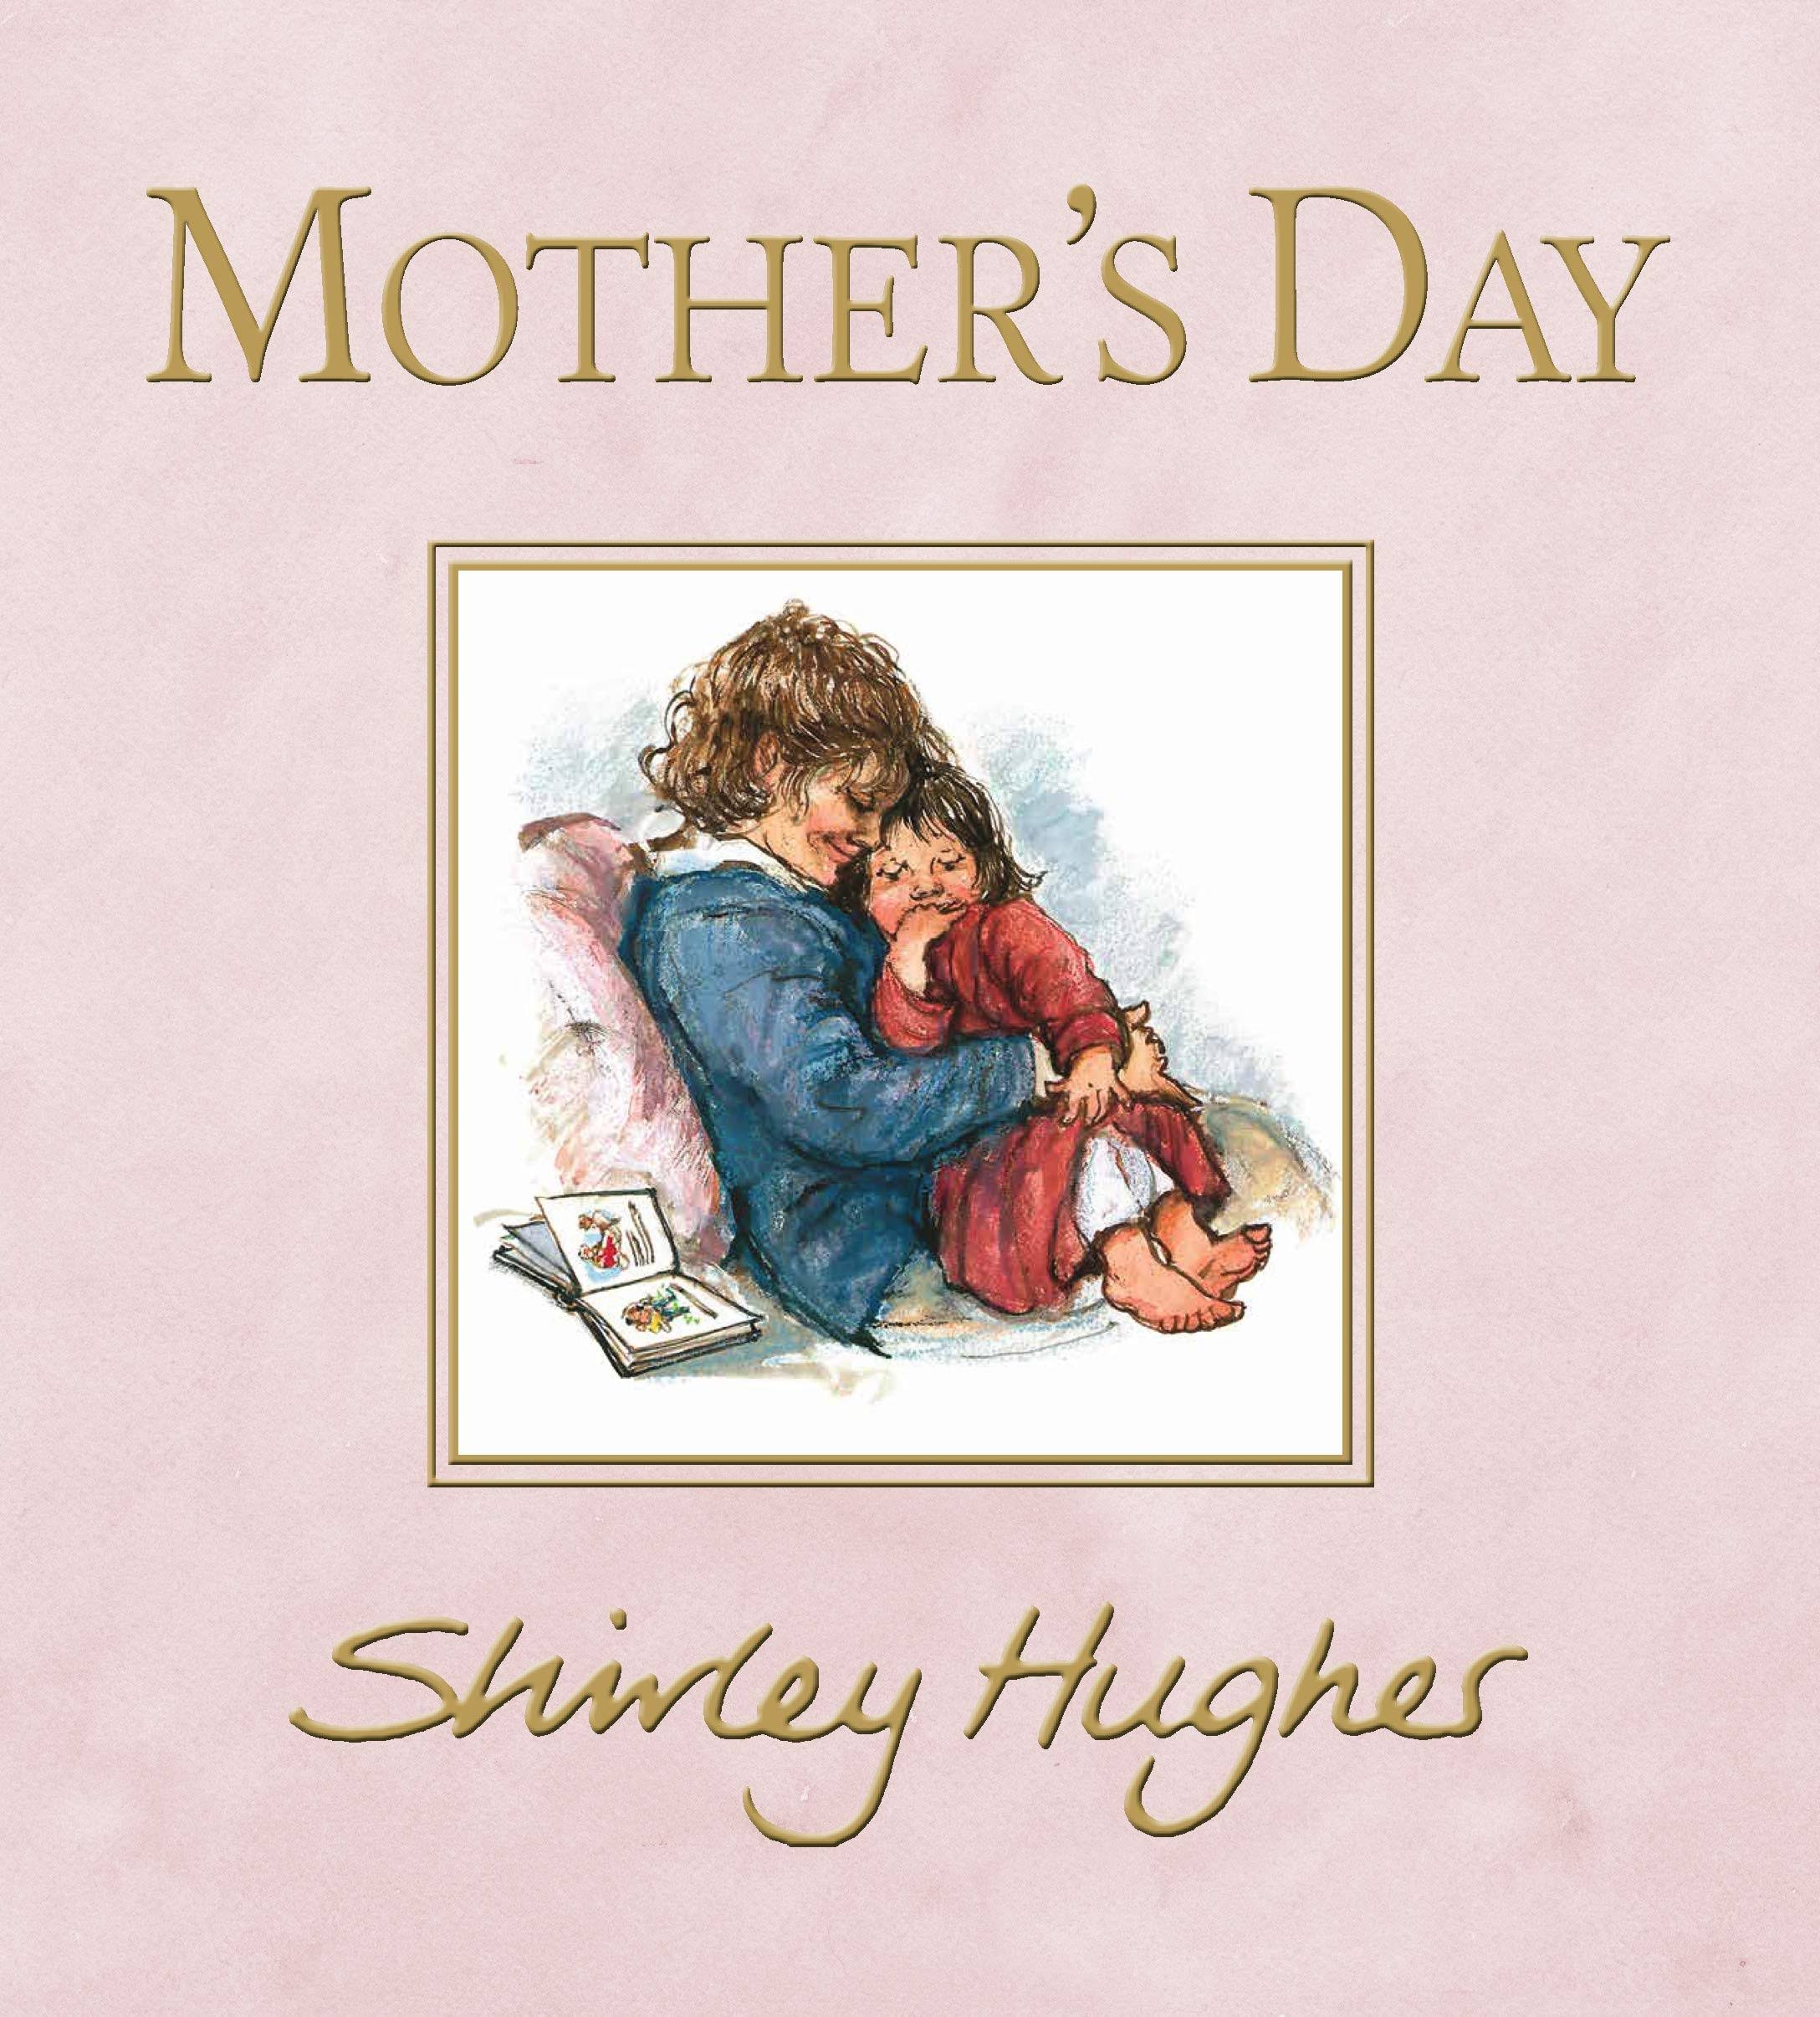 Mother's Day - Shirley Hughes